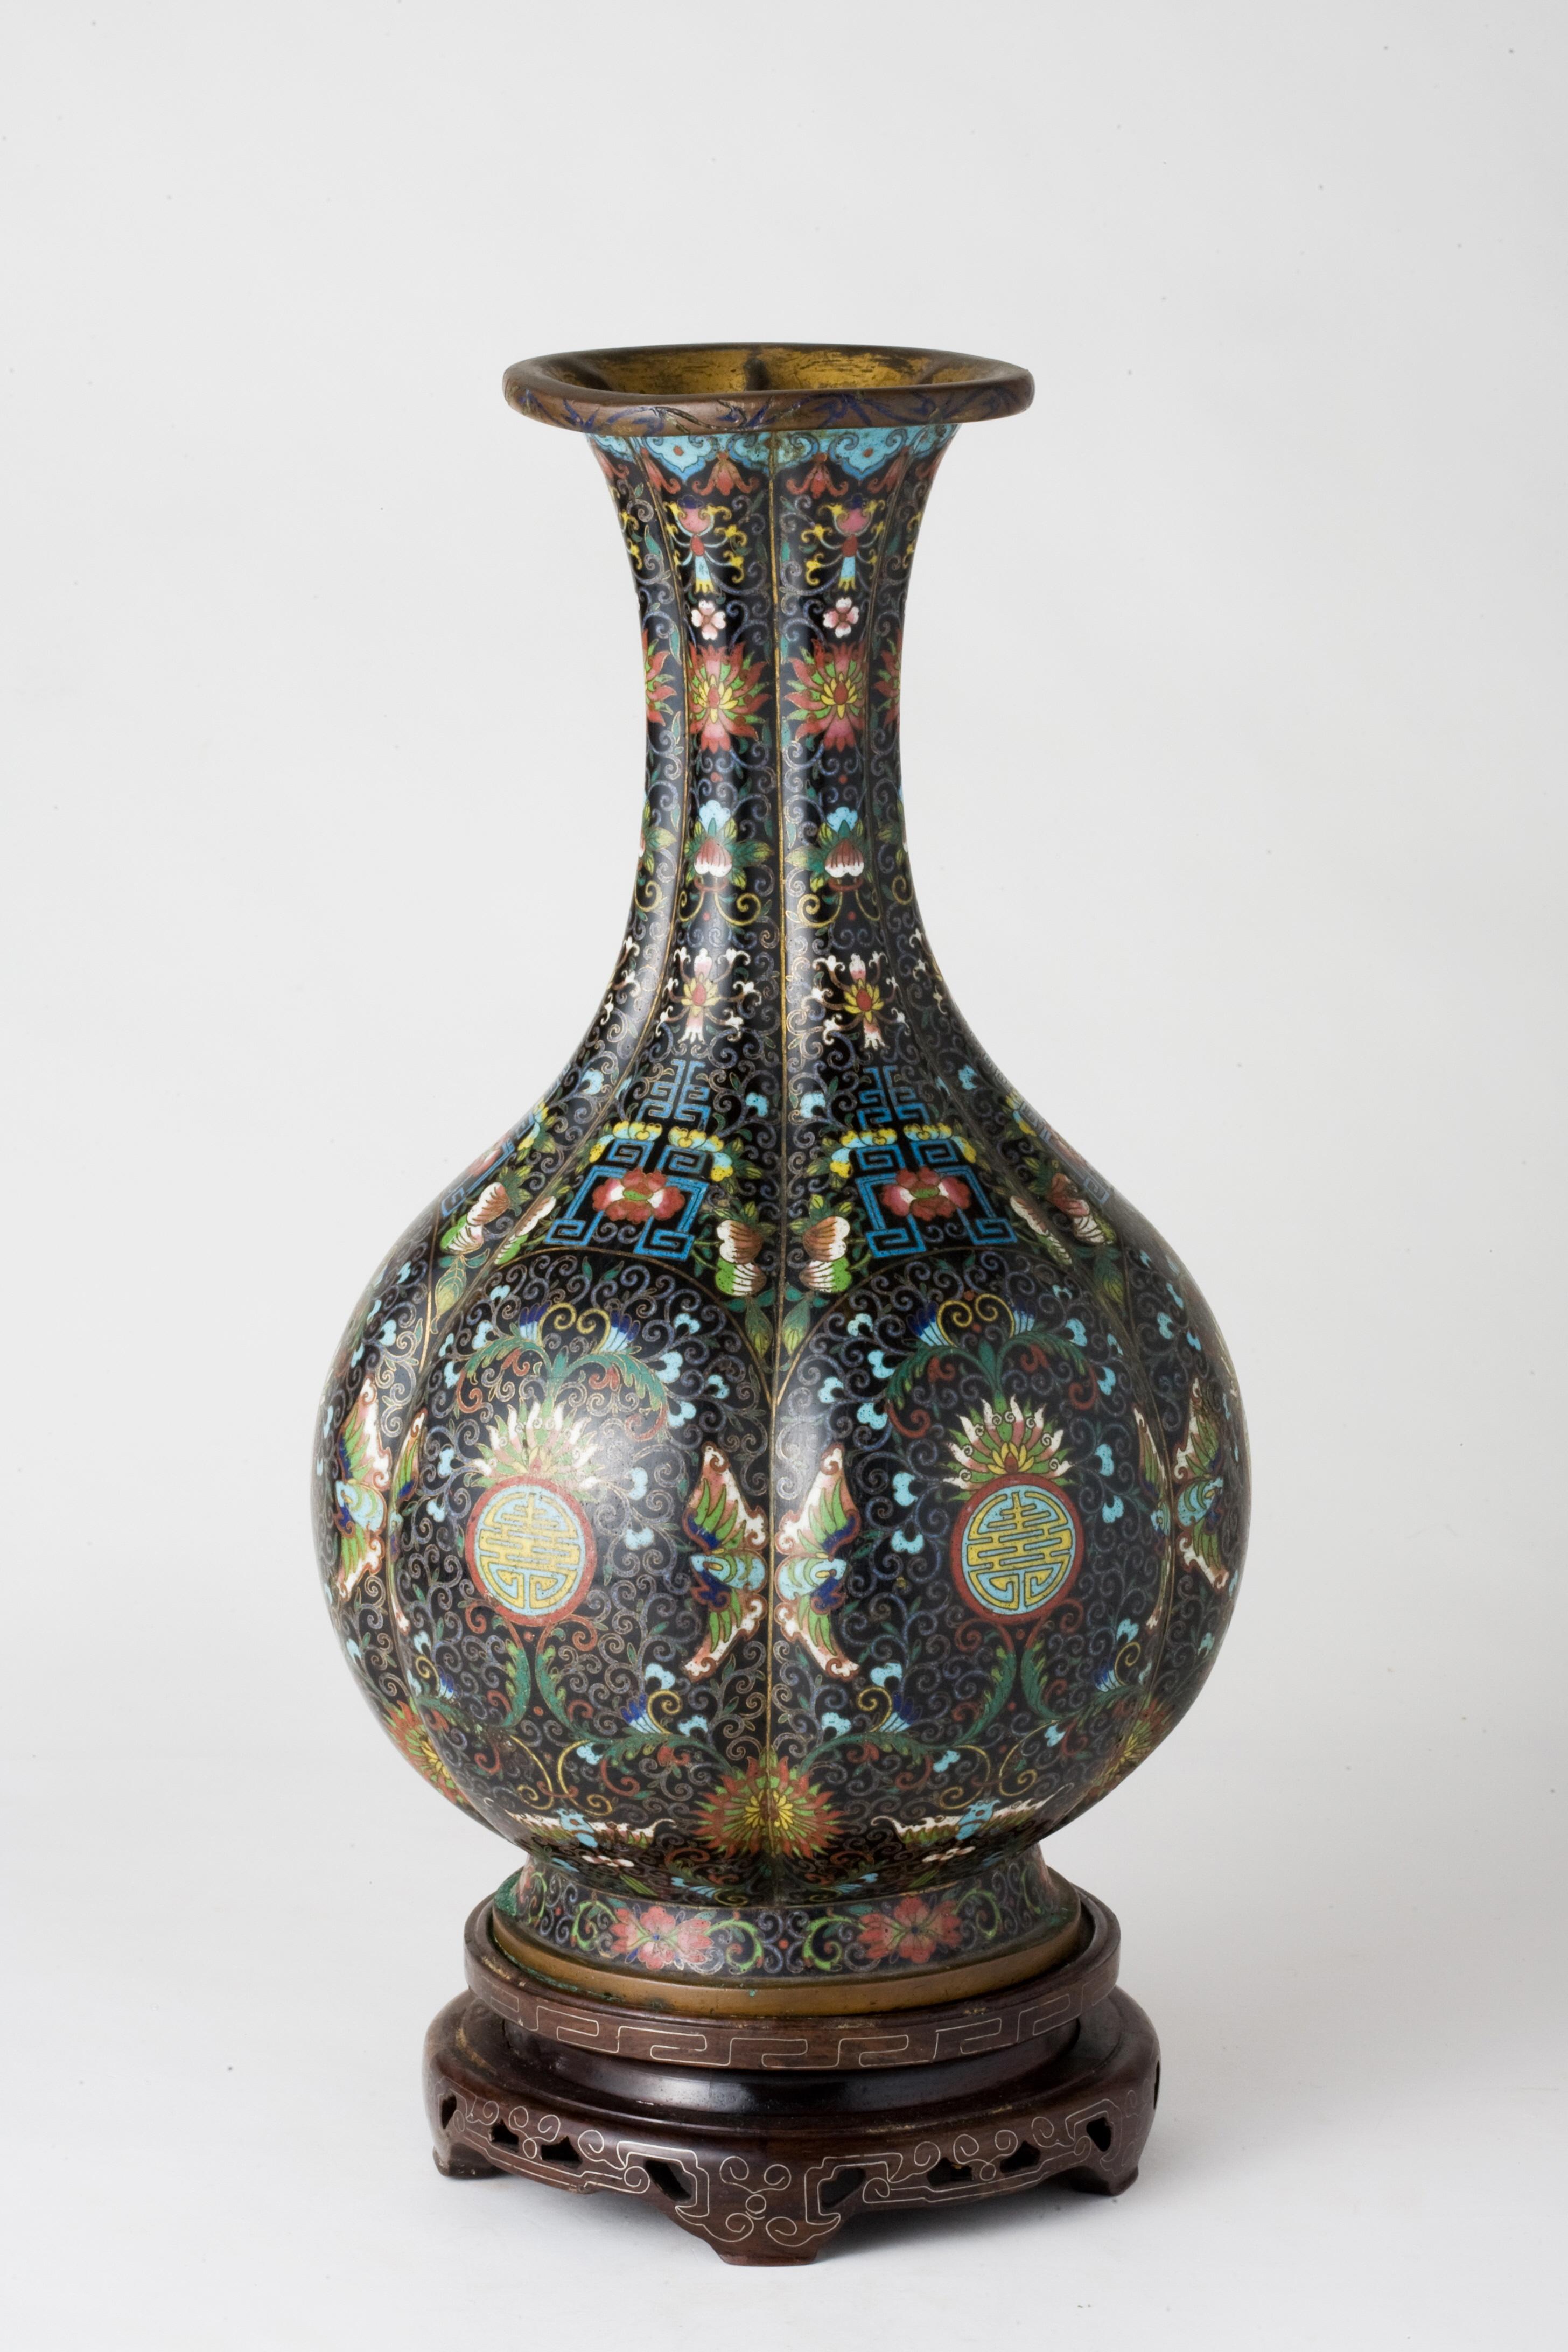 Cloisonné enamel vase of baluster form and lobed sides decorated with foliage and flowers on a black background, gilt copper neck and base. Around 1900

Period: Qing Dynasty
Type: Vase
Medium: Cloisonné Enamel
Height: 38.0 cm
Provenance: The piece